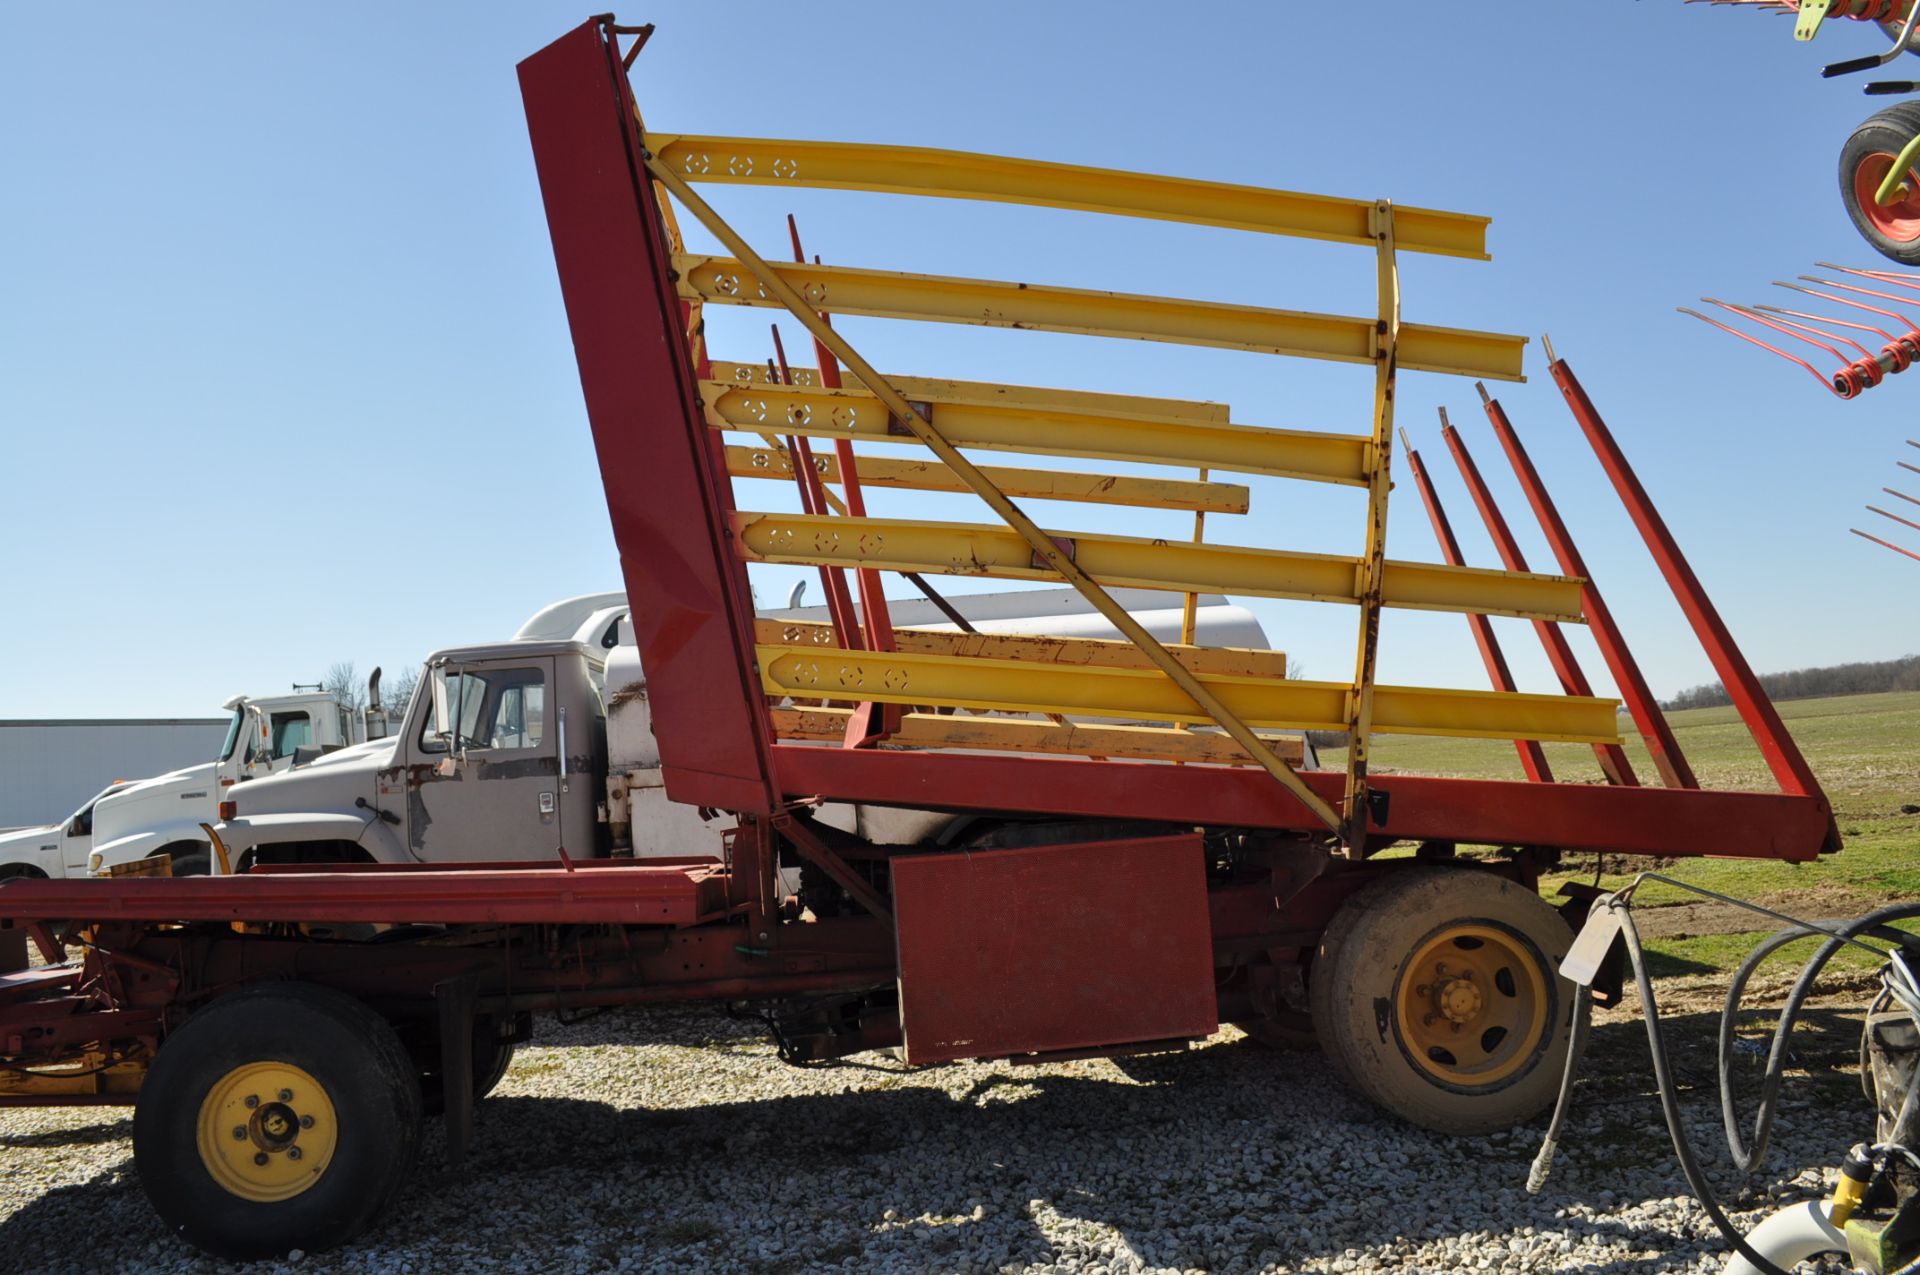 New Holland 1068 Hayliner stack wagon, diesel, 825-20 duals, 36x16.00-17.5 front, 9604 hrs, SN 1988 - Image 30 of 32